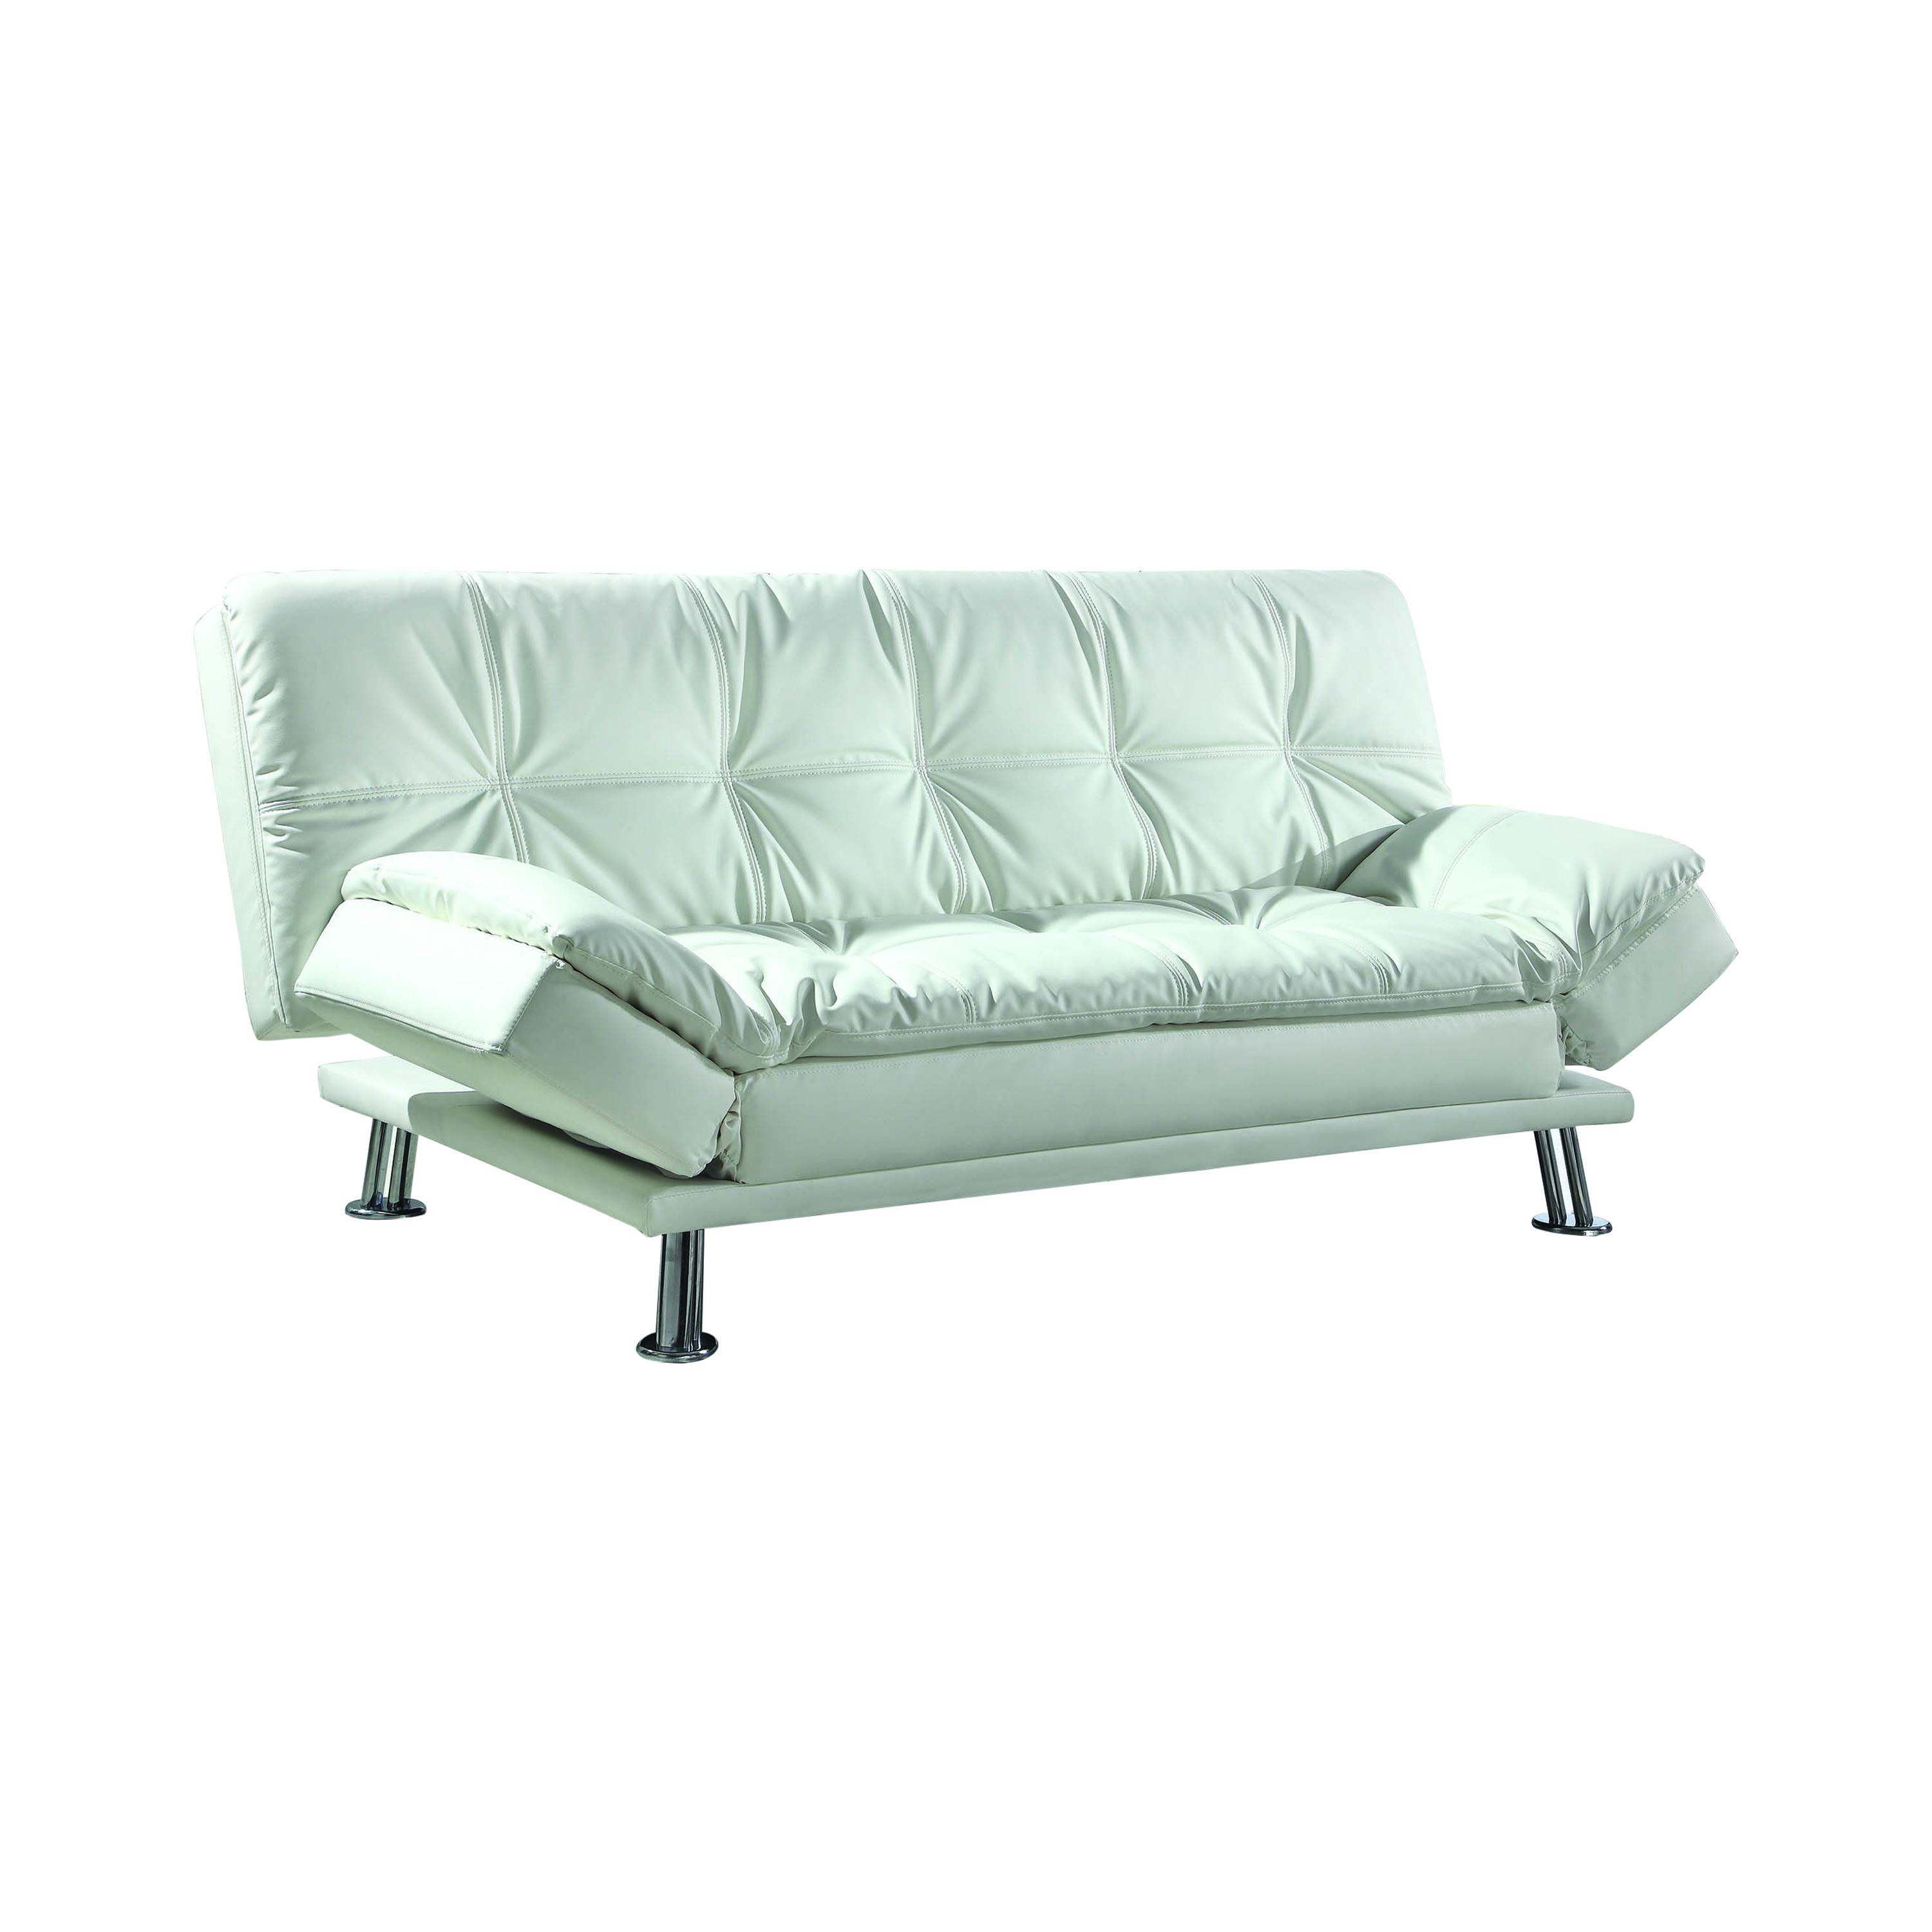 Modern Sofa bed 300291 Dilleston 300291 in White Leatherette